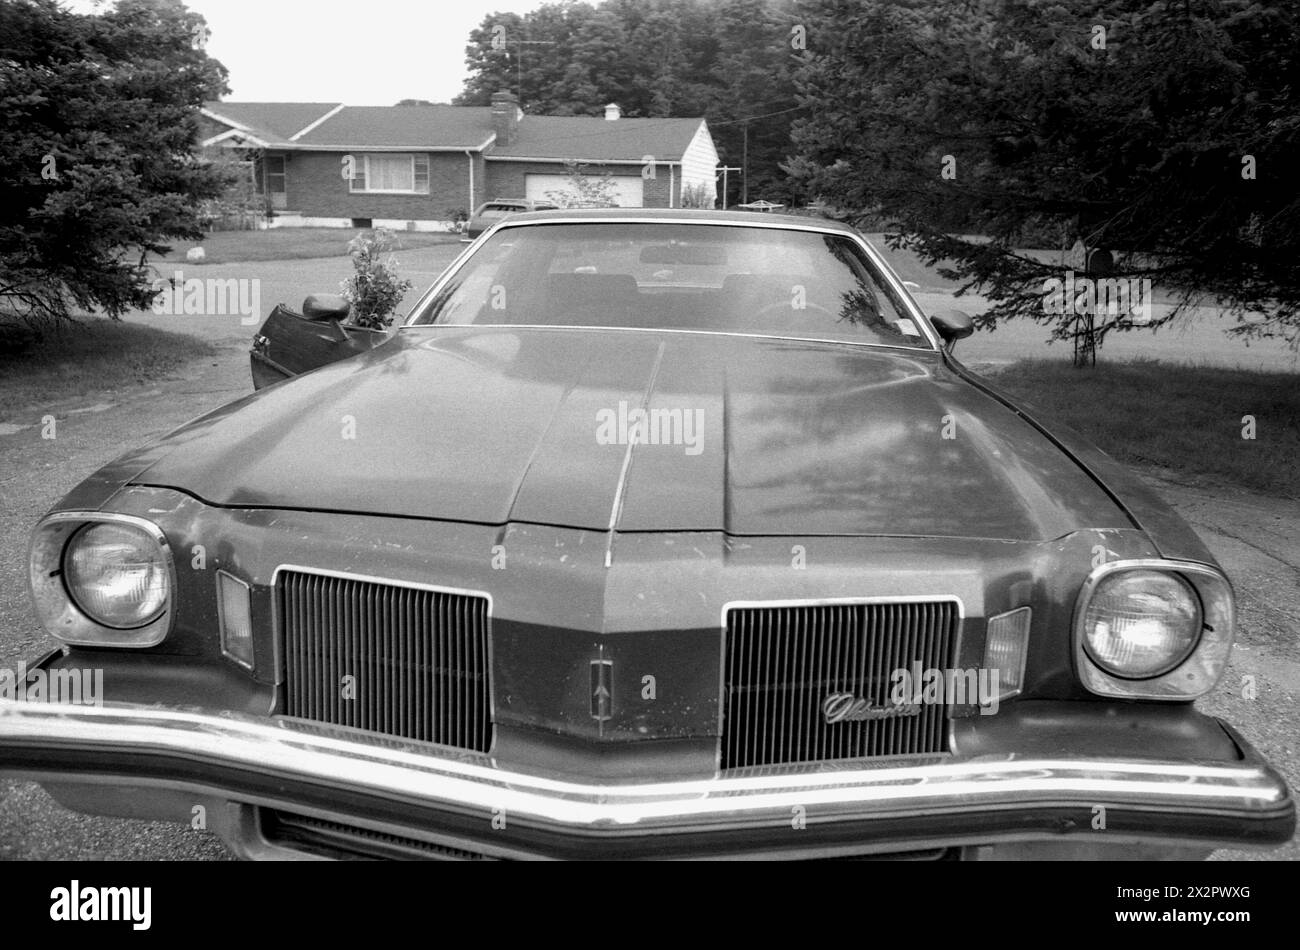 Connecticut, U.S.A., 1982. An Oldsmobile vehicle in a driveway. Stock Photo